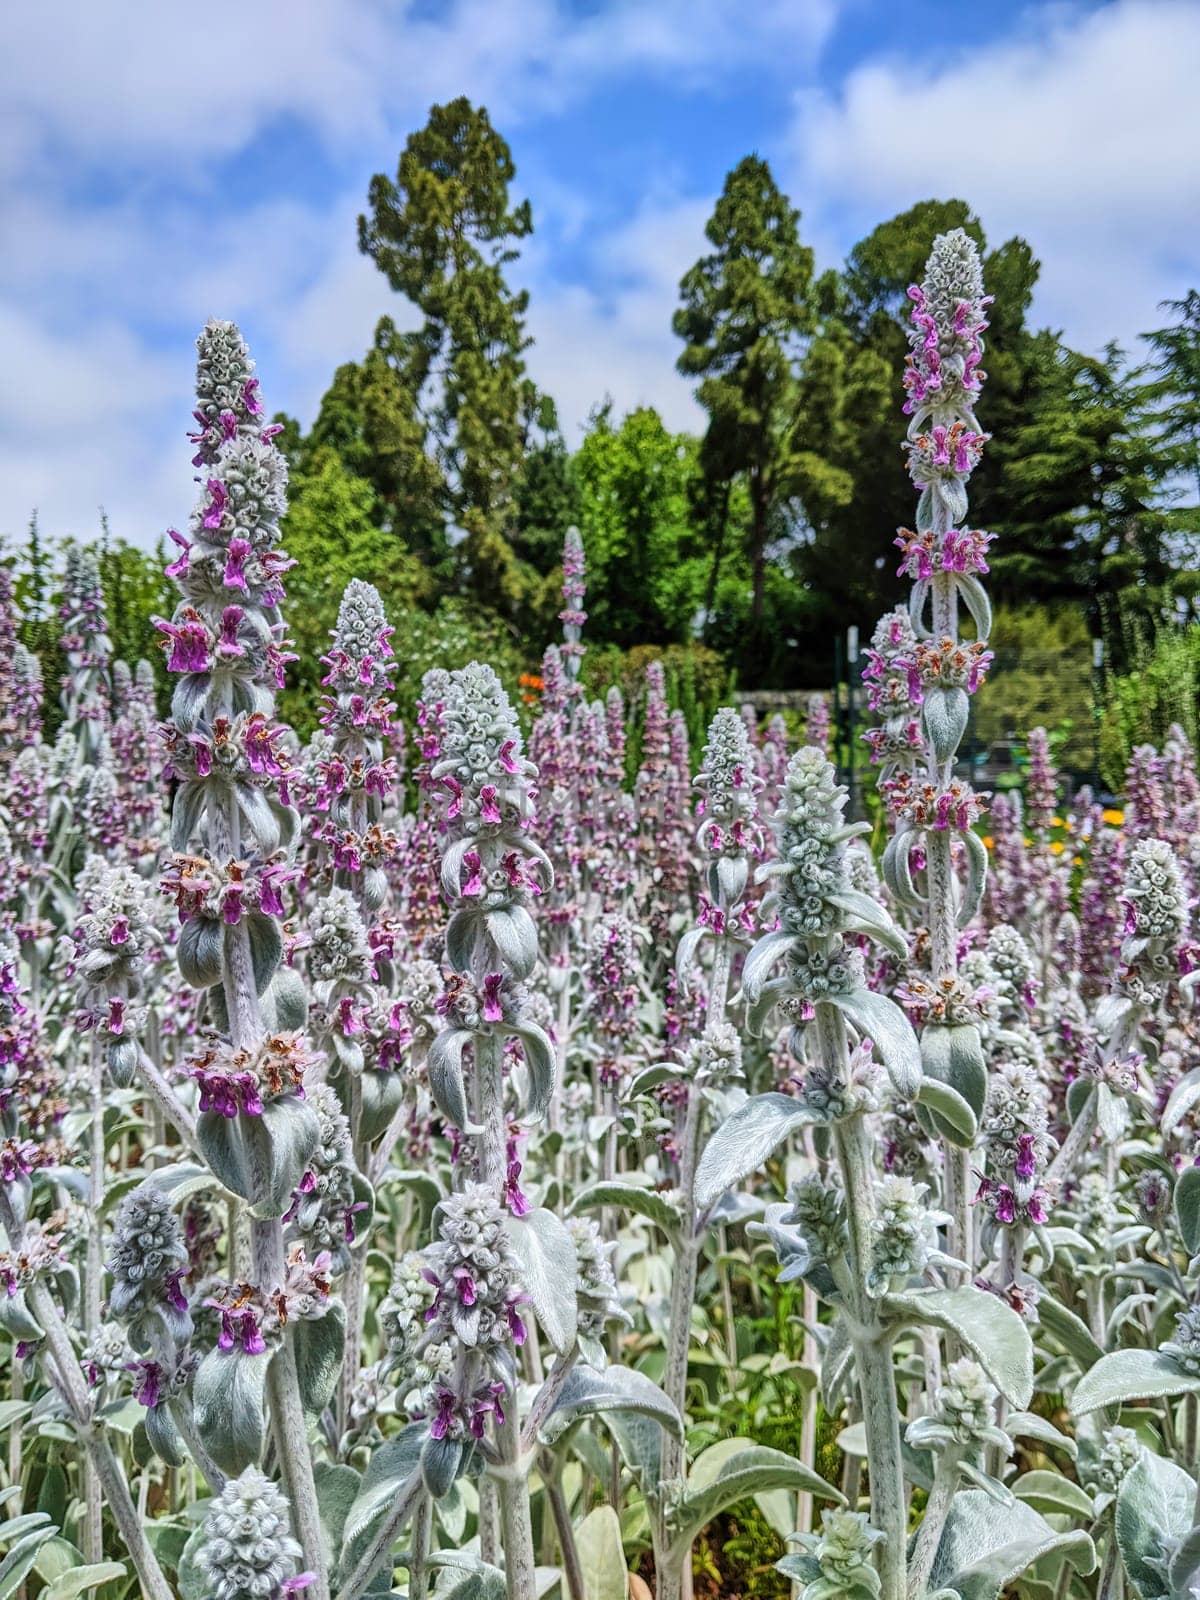 Lush garden in Oakland, California in 2023, featuring a vibrant sea of tall white and purple Stachys flowers under a partially cloudy sky